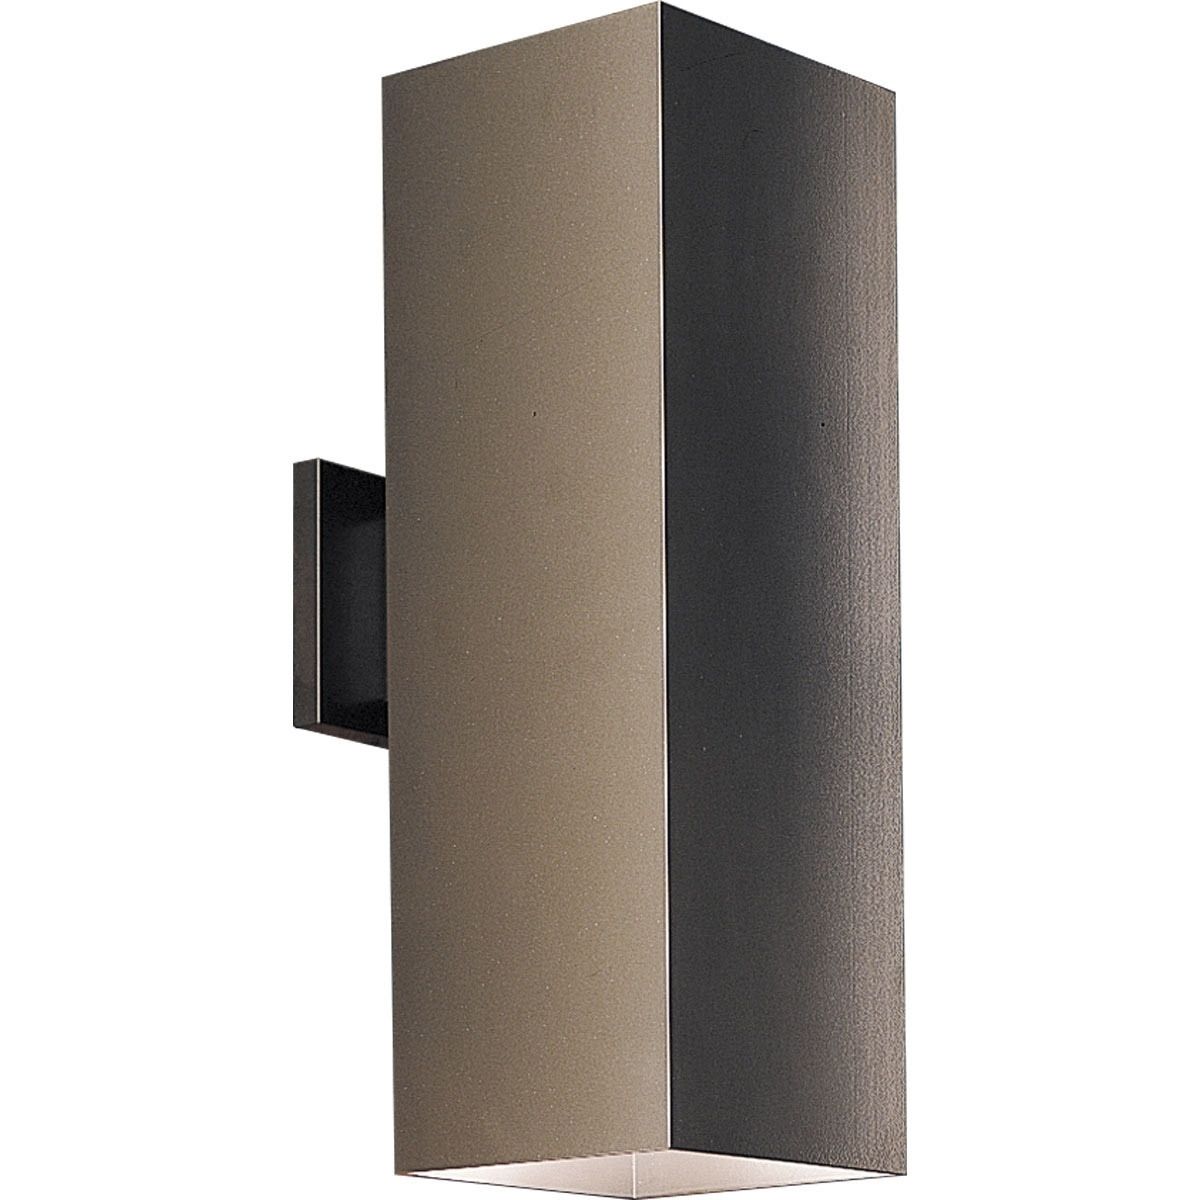 26 Modern Commercial Outdoor Wall Sconces, Outdoor Lantern Light Inside Commercial Outdoor Wall Lighting (View 13 of 15)